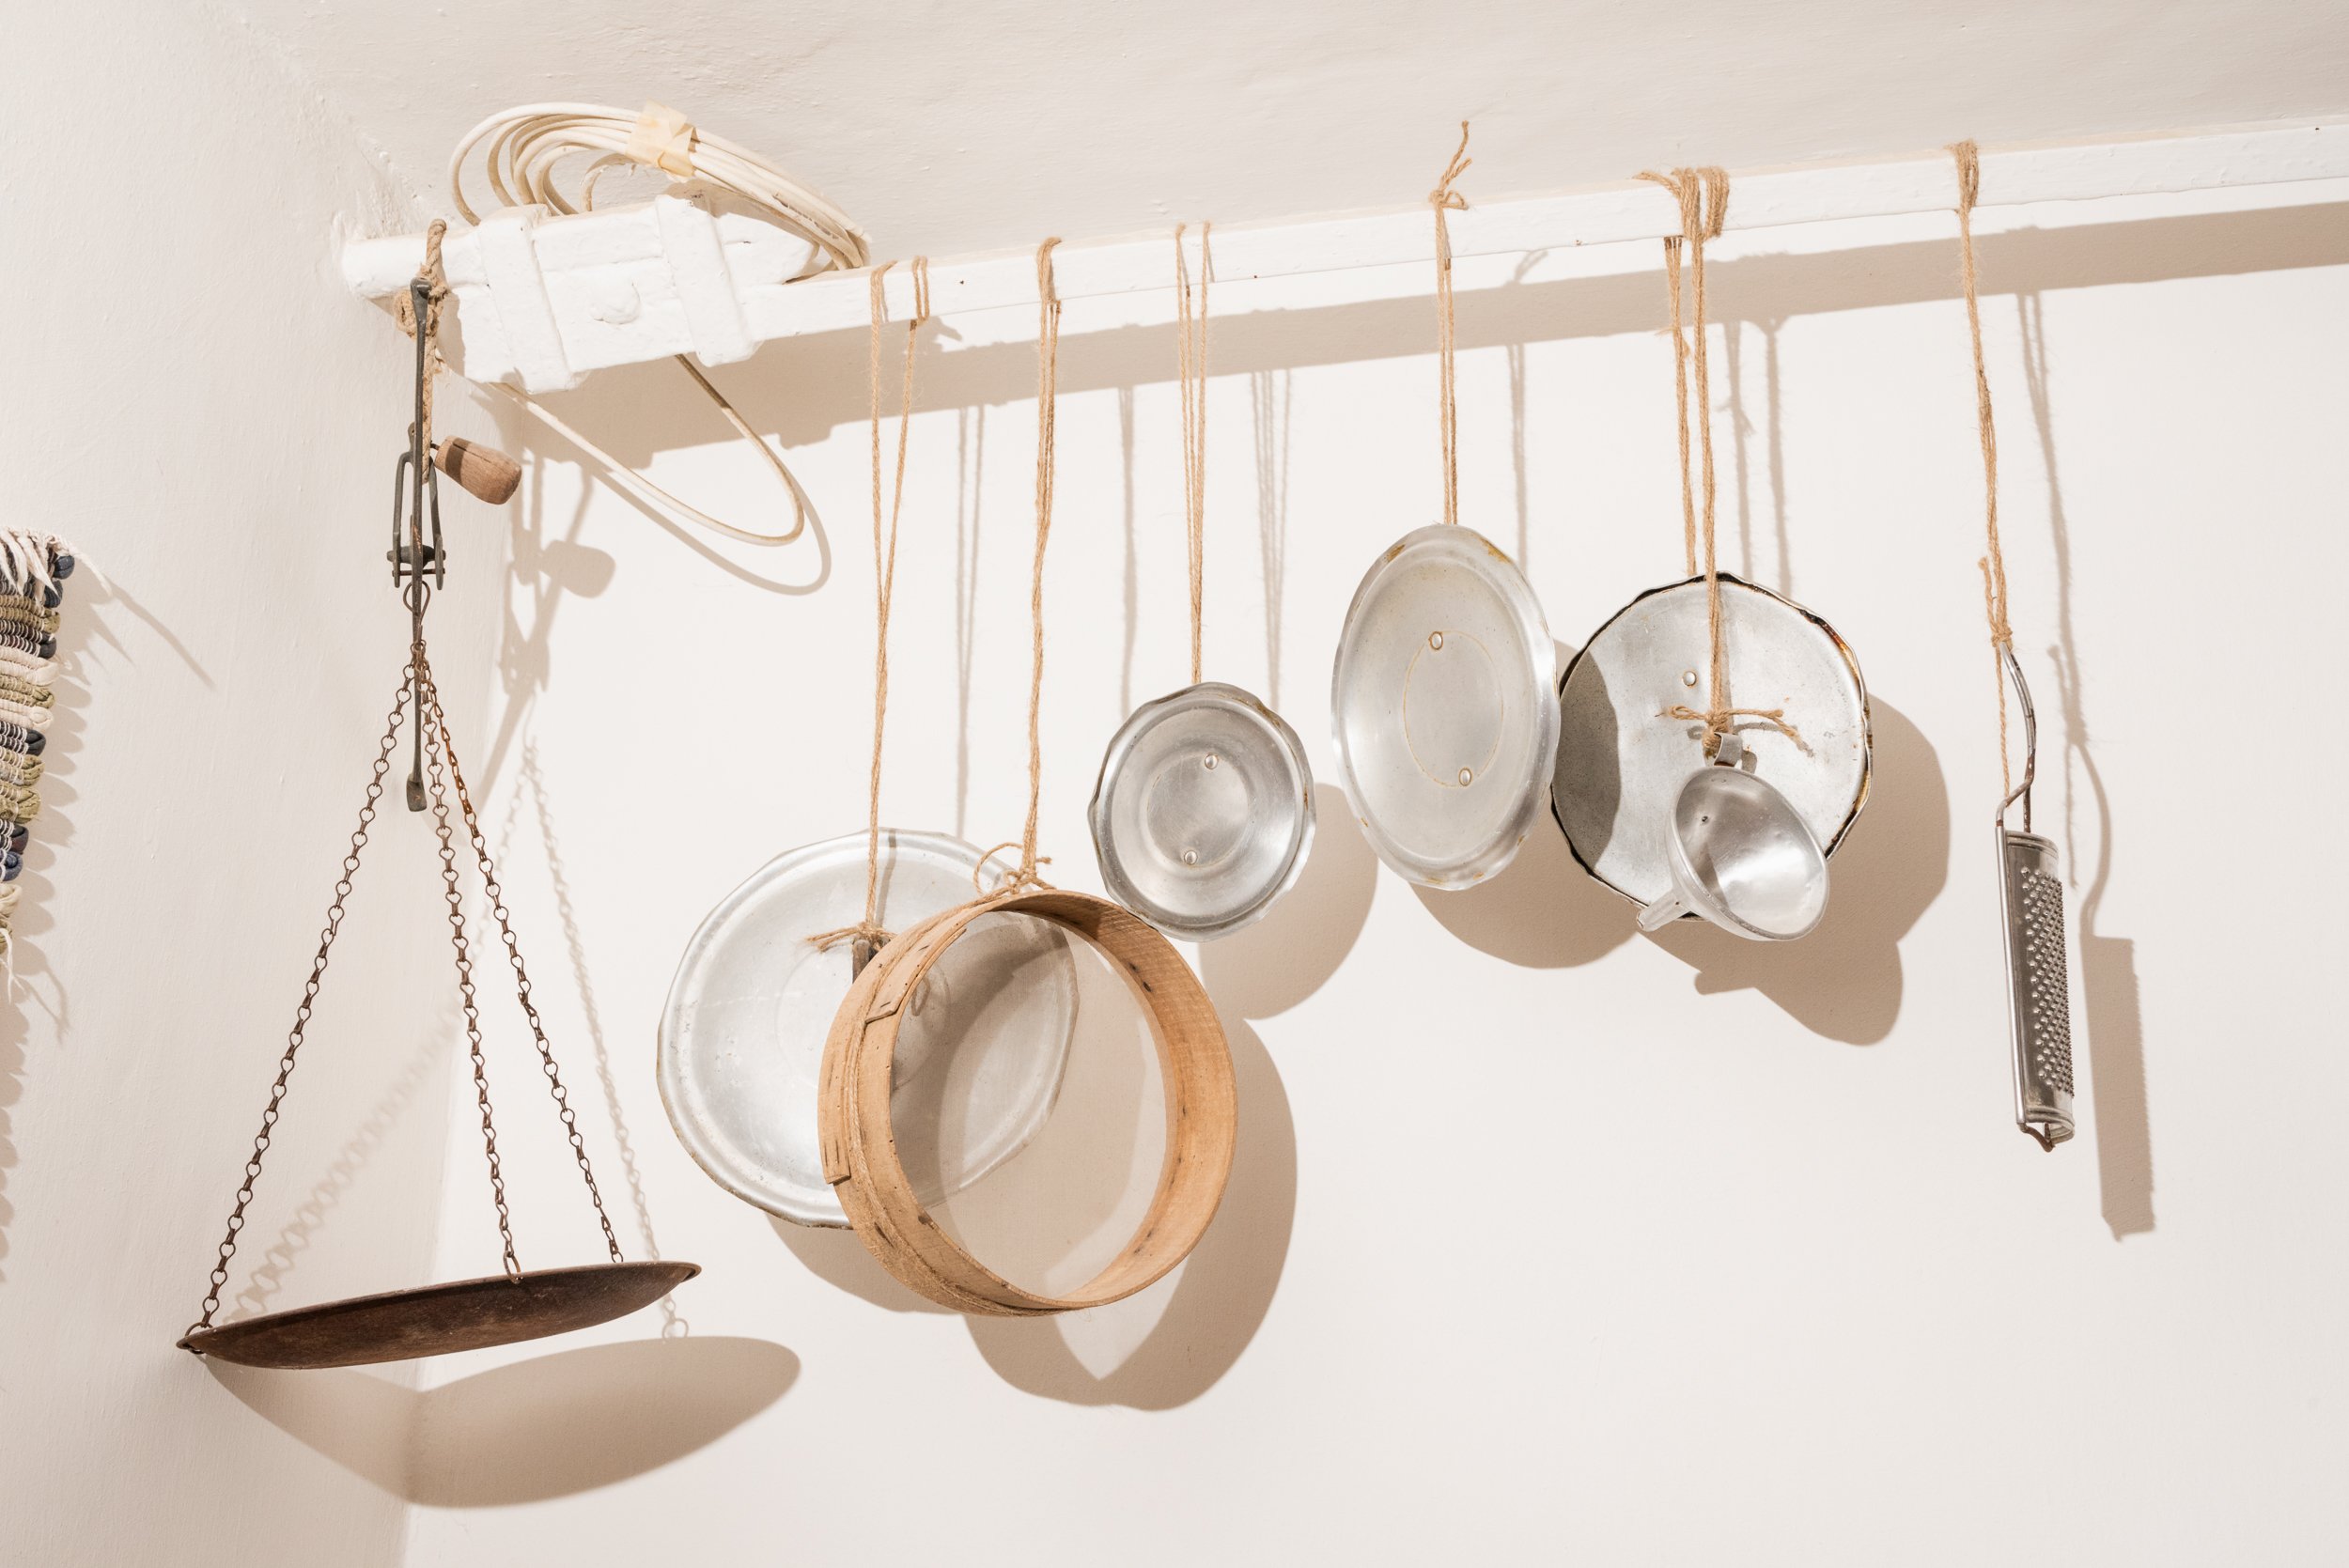 Hanging pots and pans